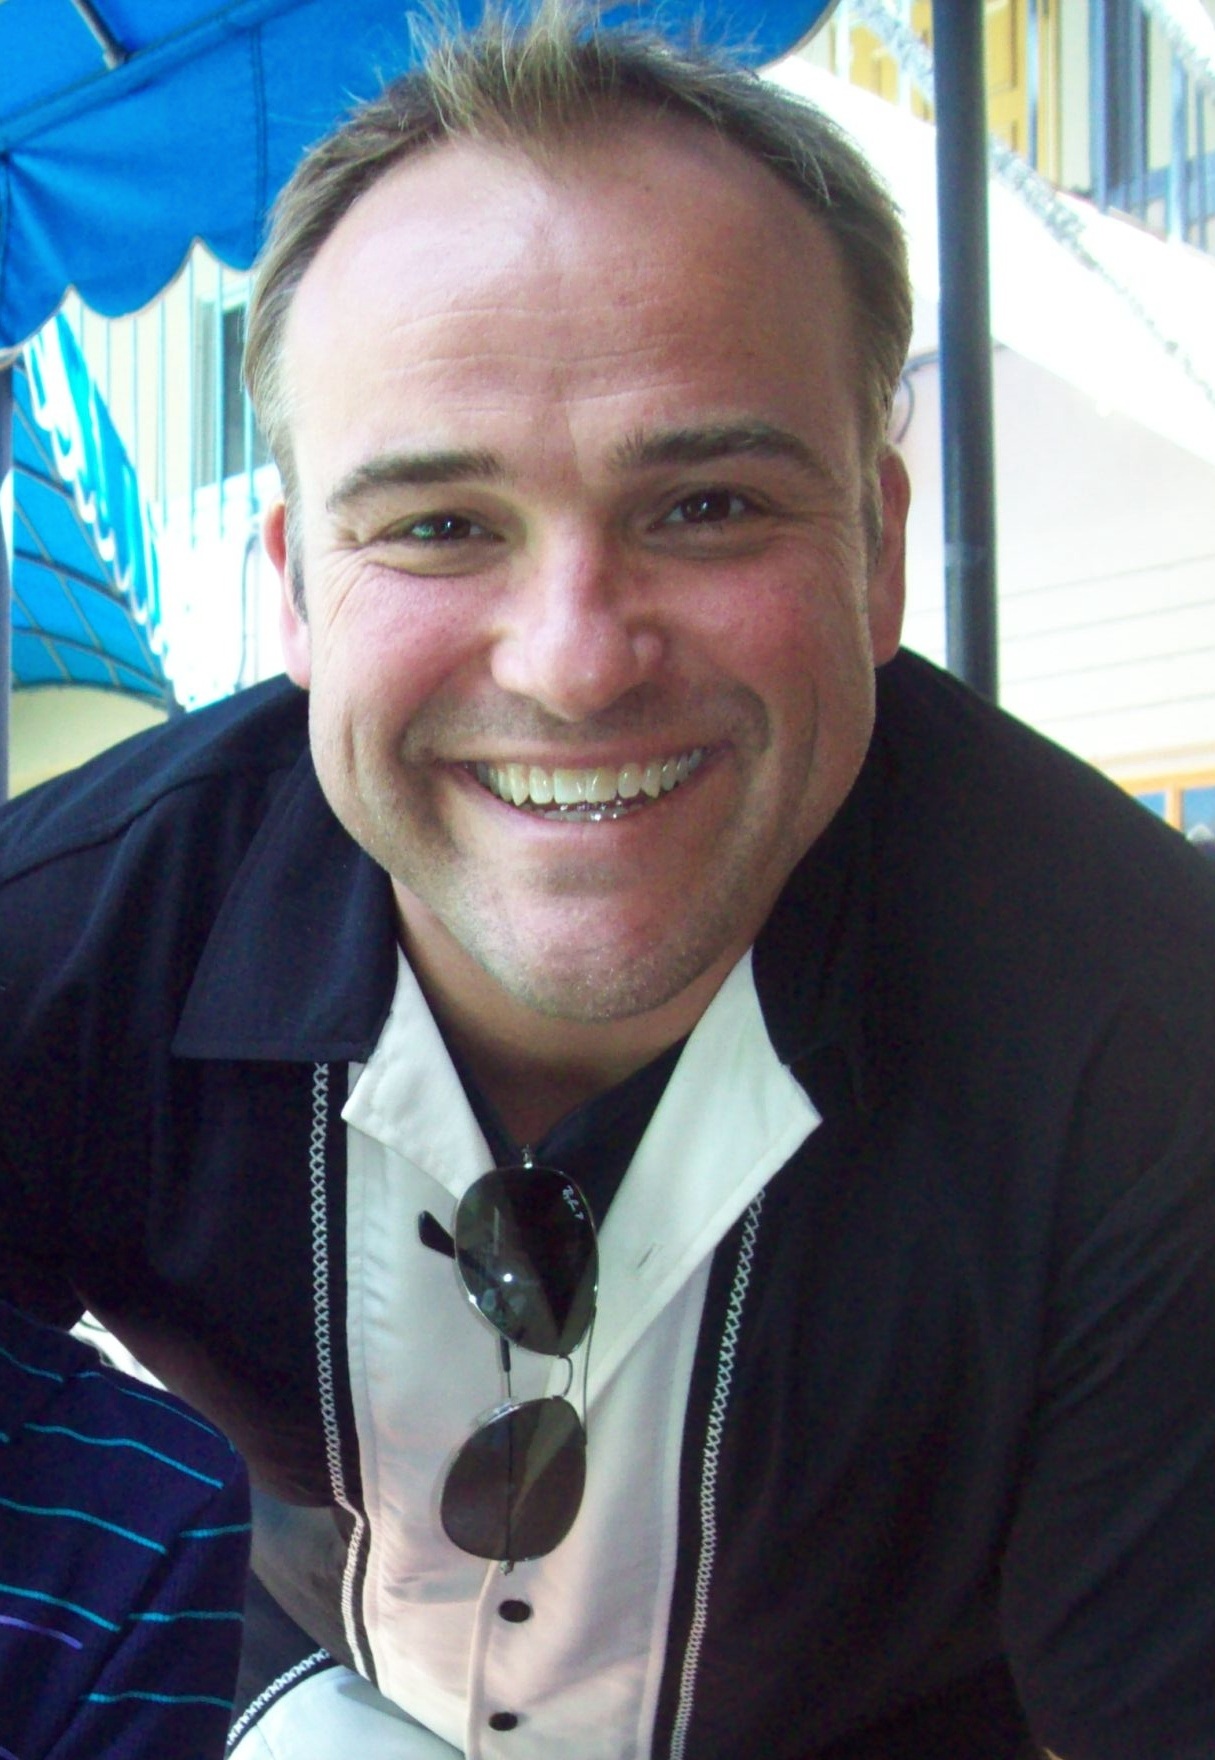 Wizards Of Waverly Place Cartoon Porn - David DeLuise - Wikipedia